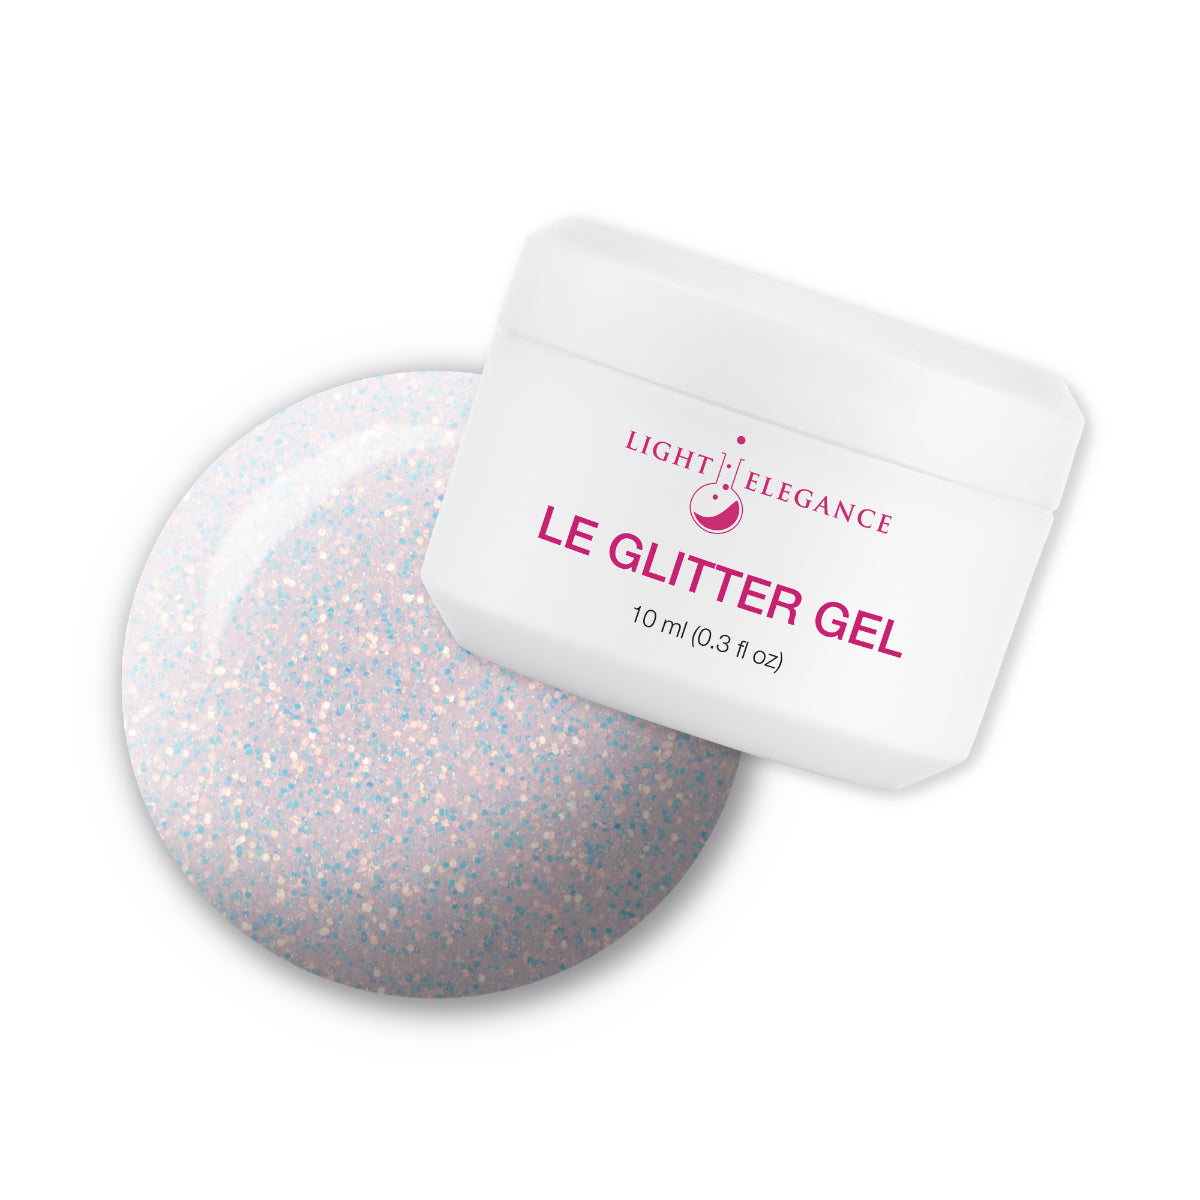 Light Elegance Glitter Gel - She's a Star :: New Packaging - Creata Beauty - Professional Beauty Products